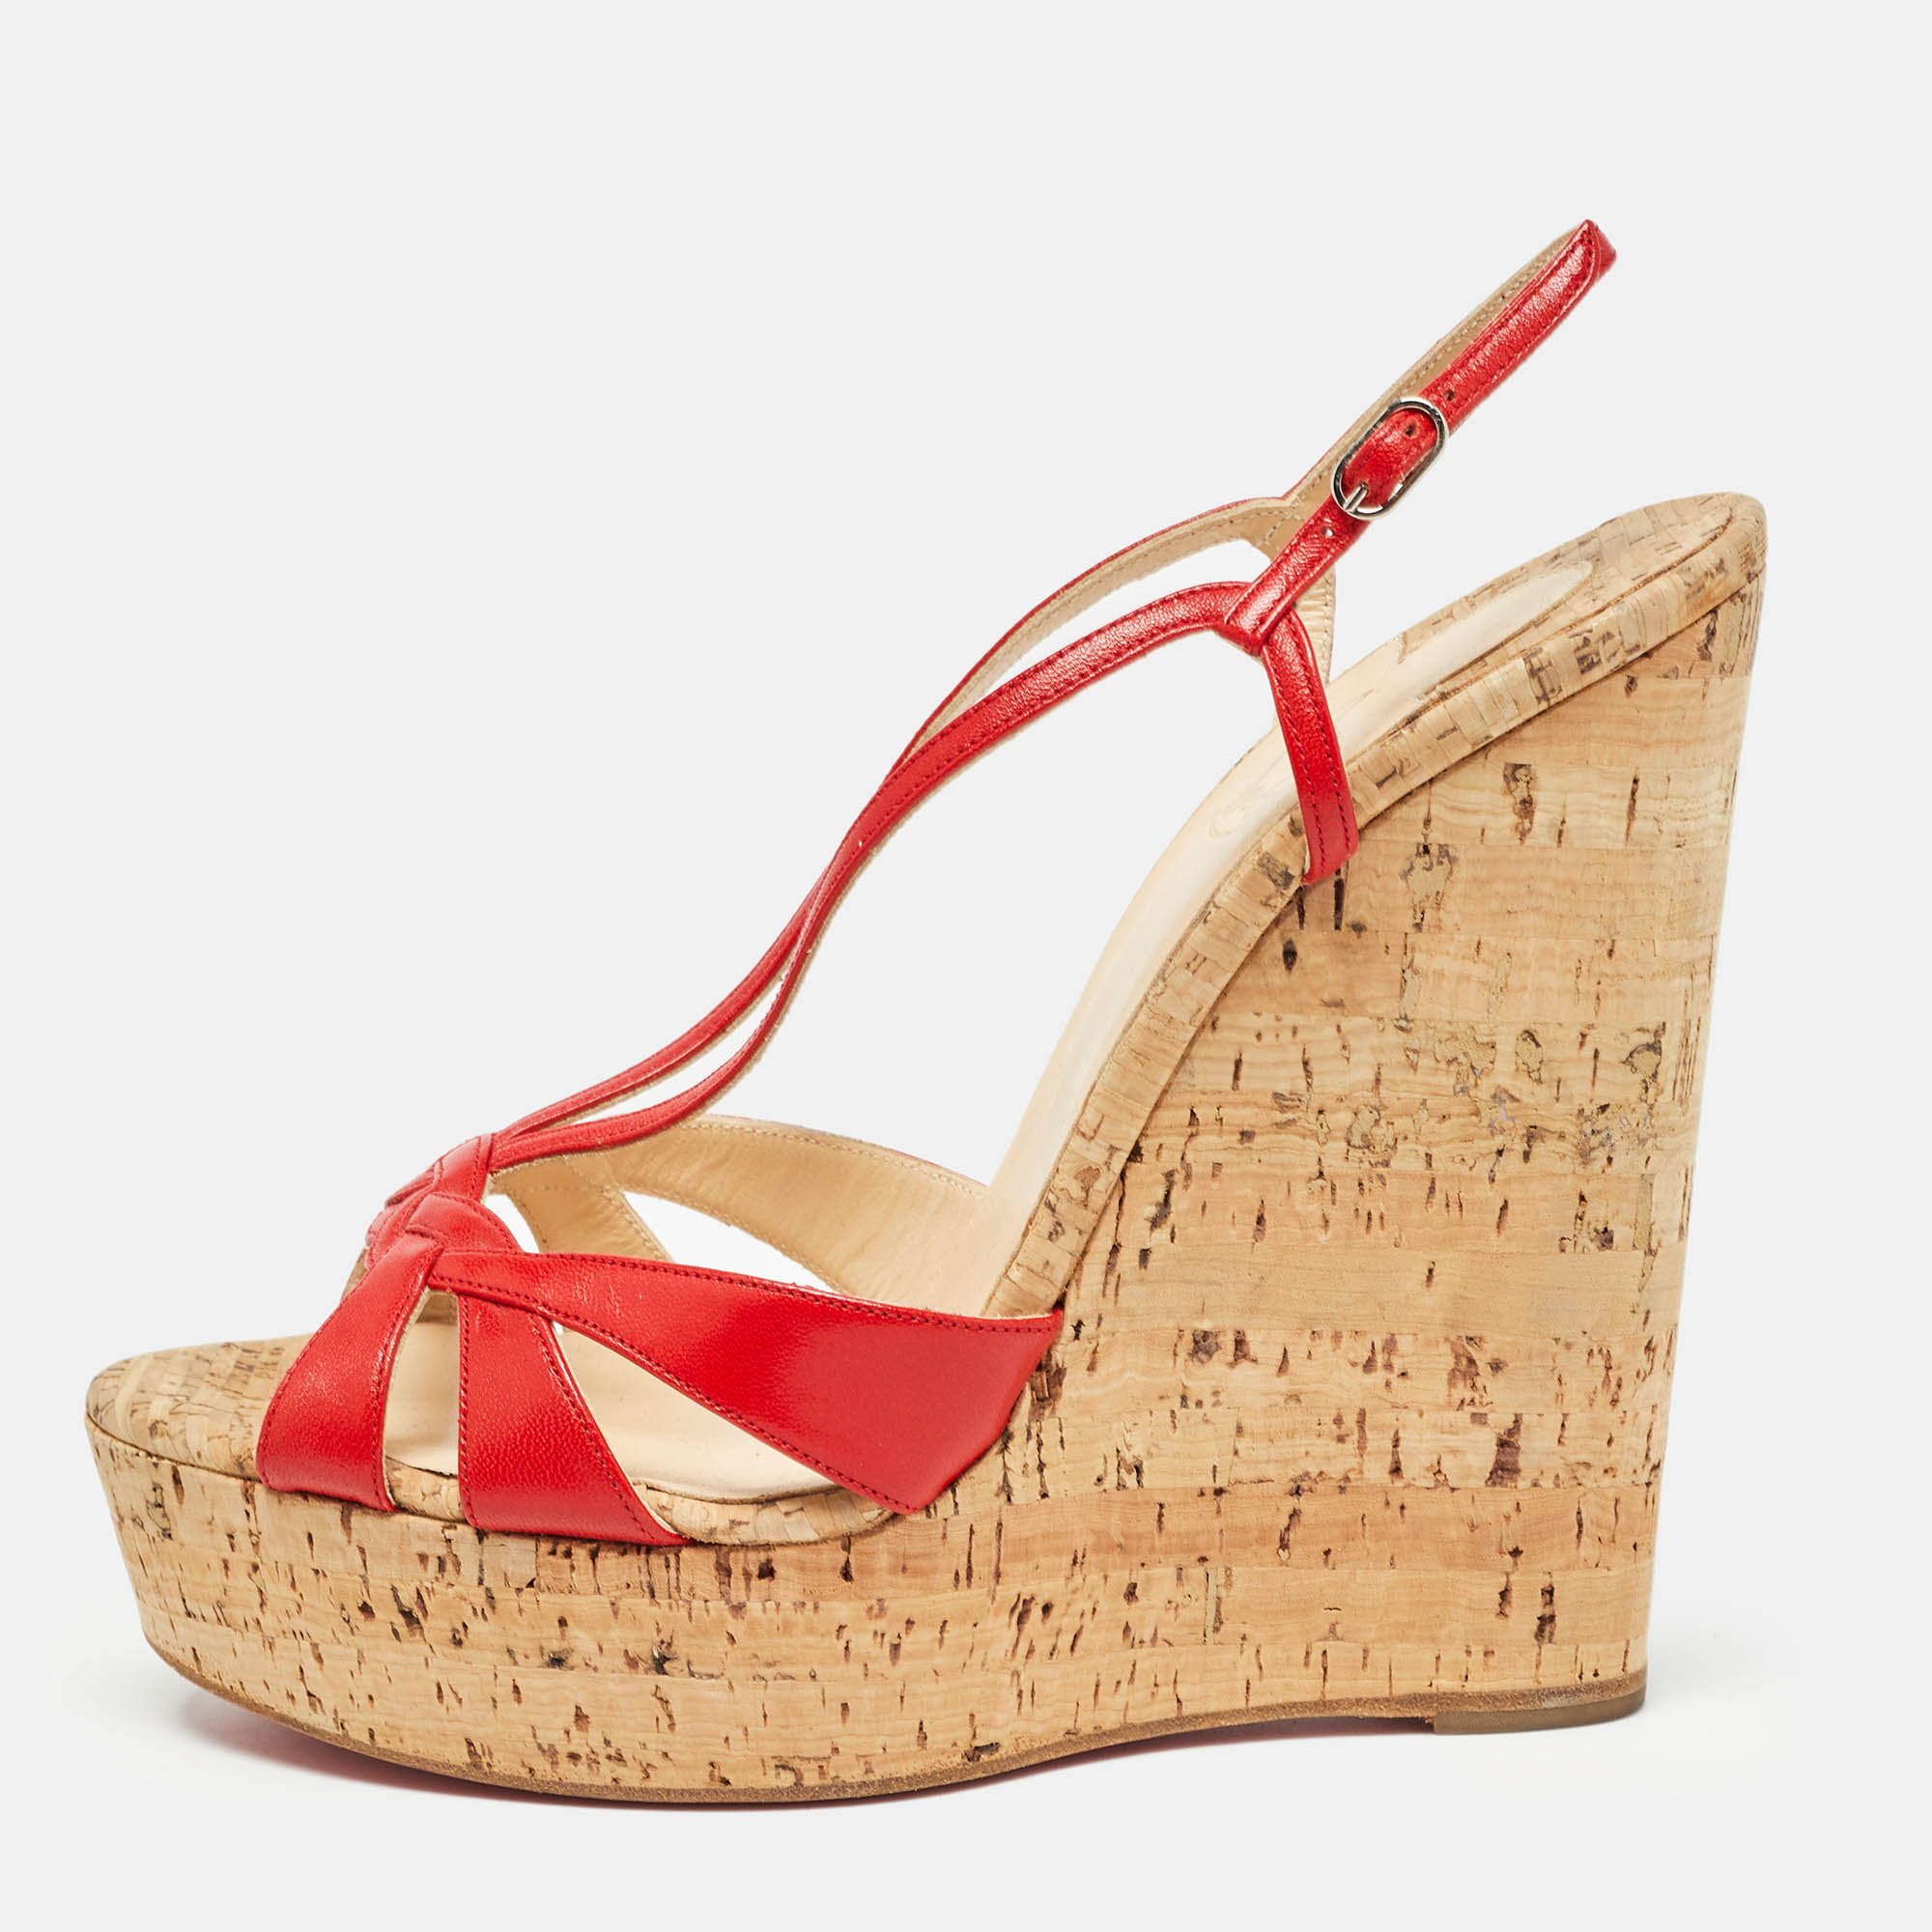 Christian louboutin red leather strappy cork wedge sandals size 40